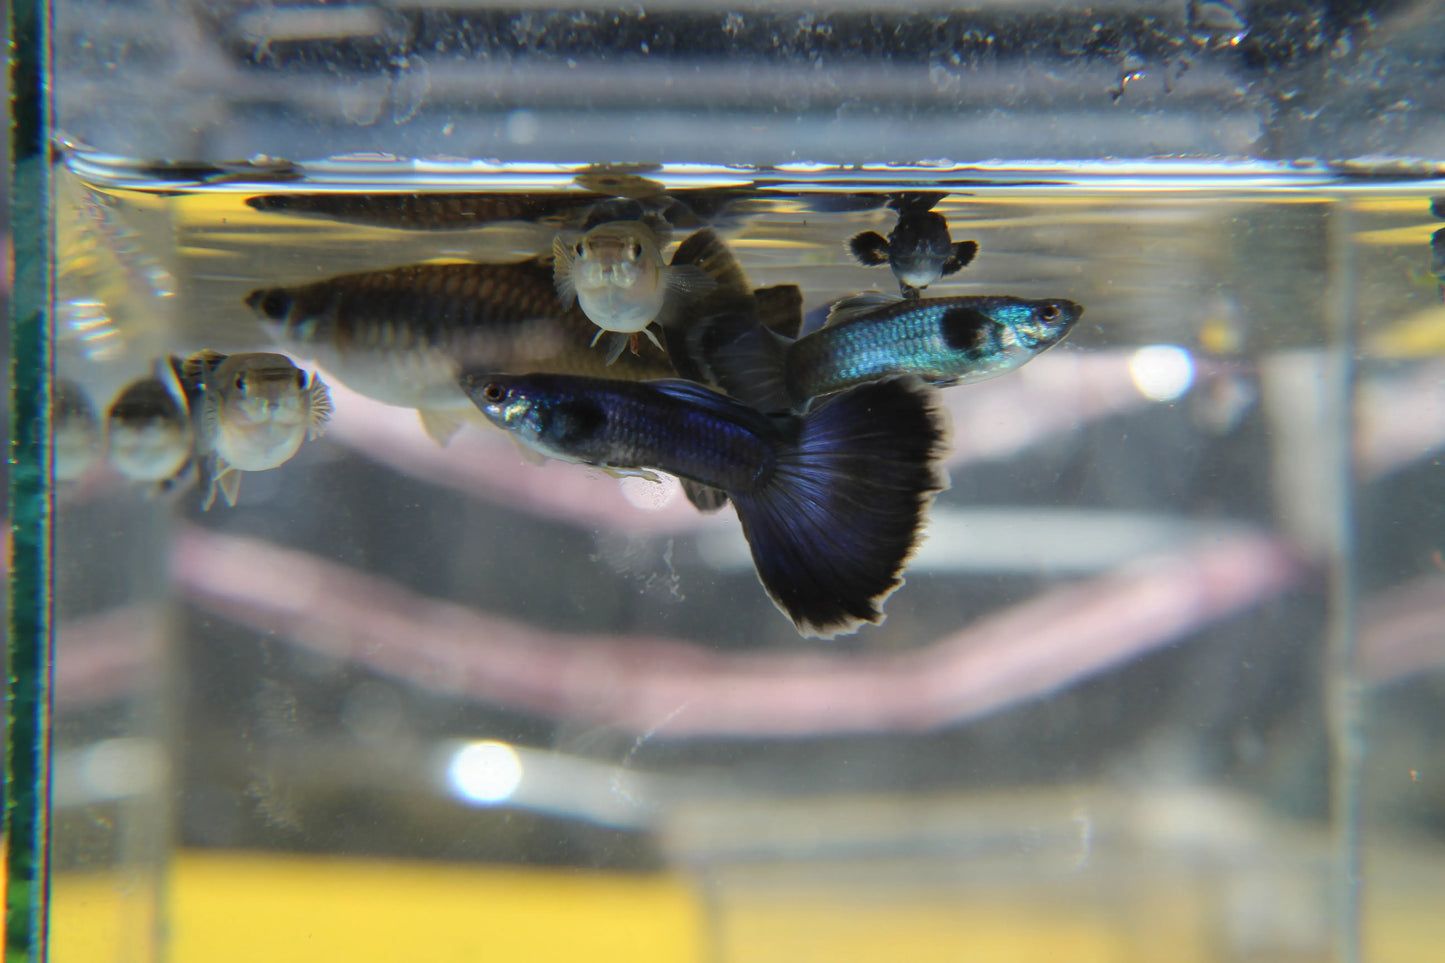 Blue Moscow Guppy Pair